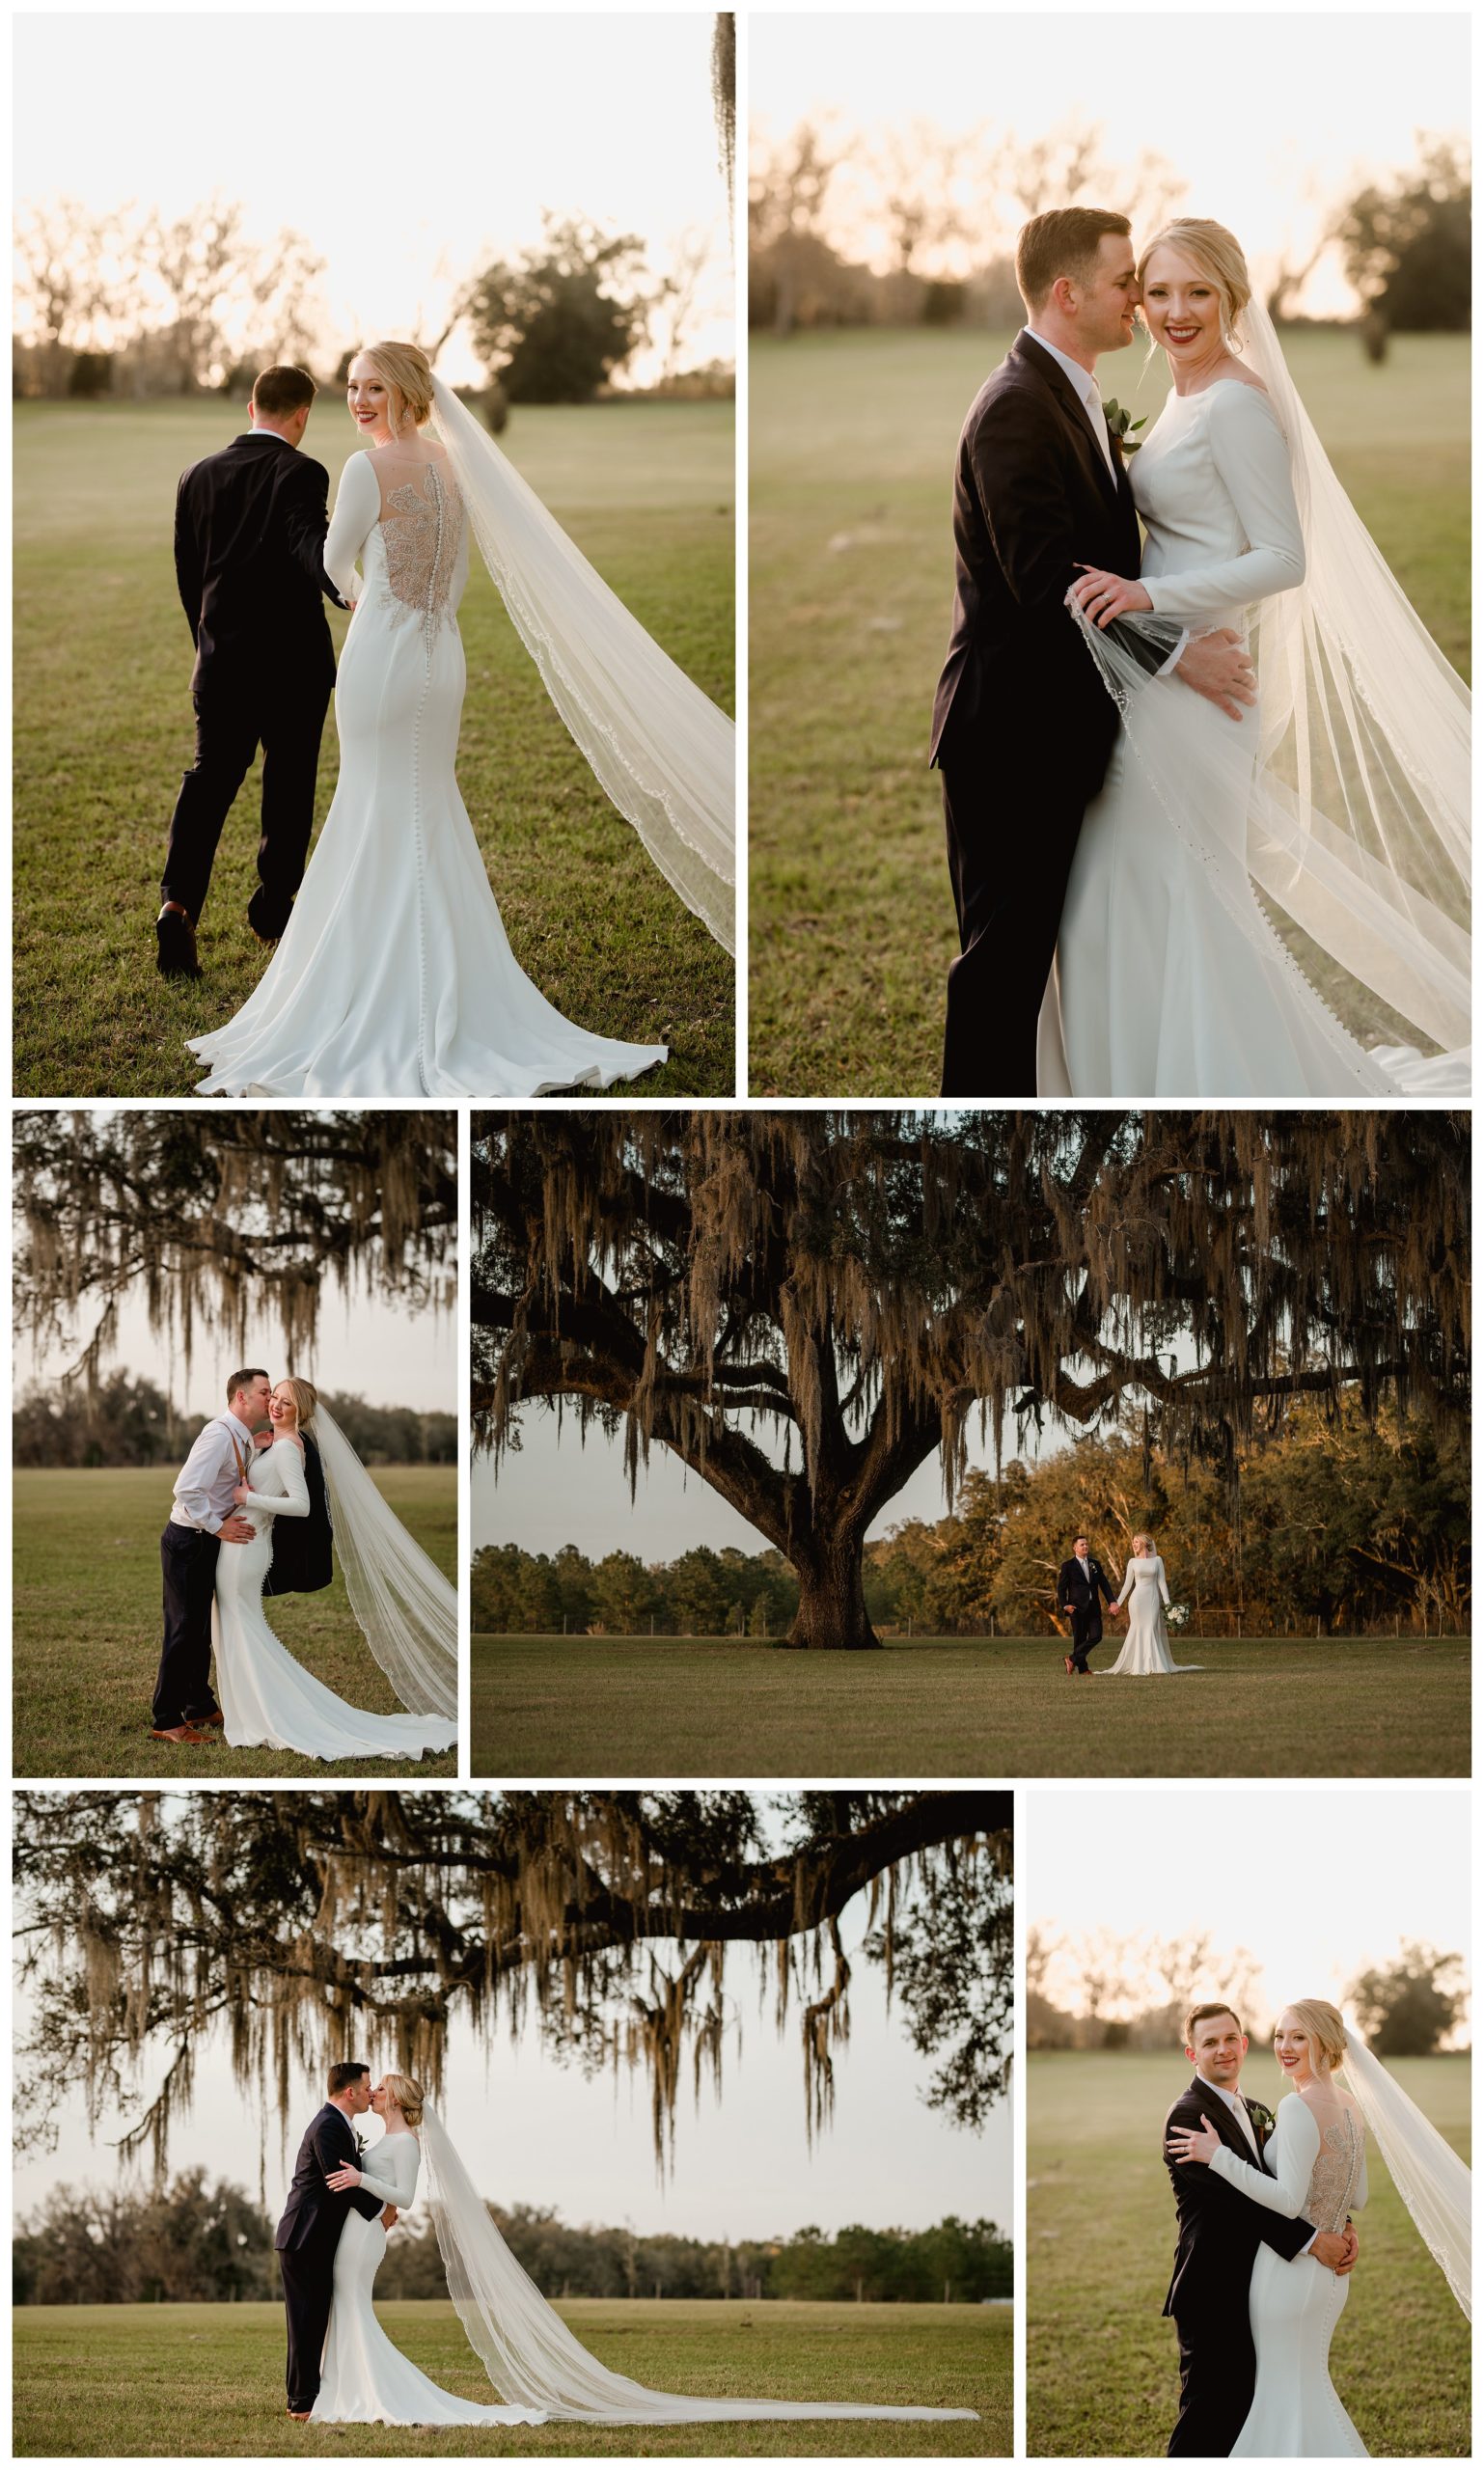 Posing ideas for couple with long veil on the wedding day - Shelly Williams Photography